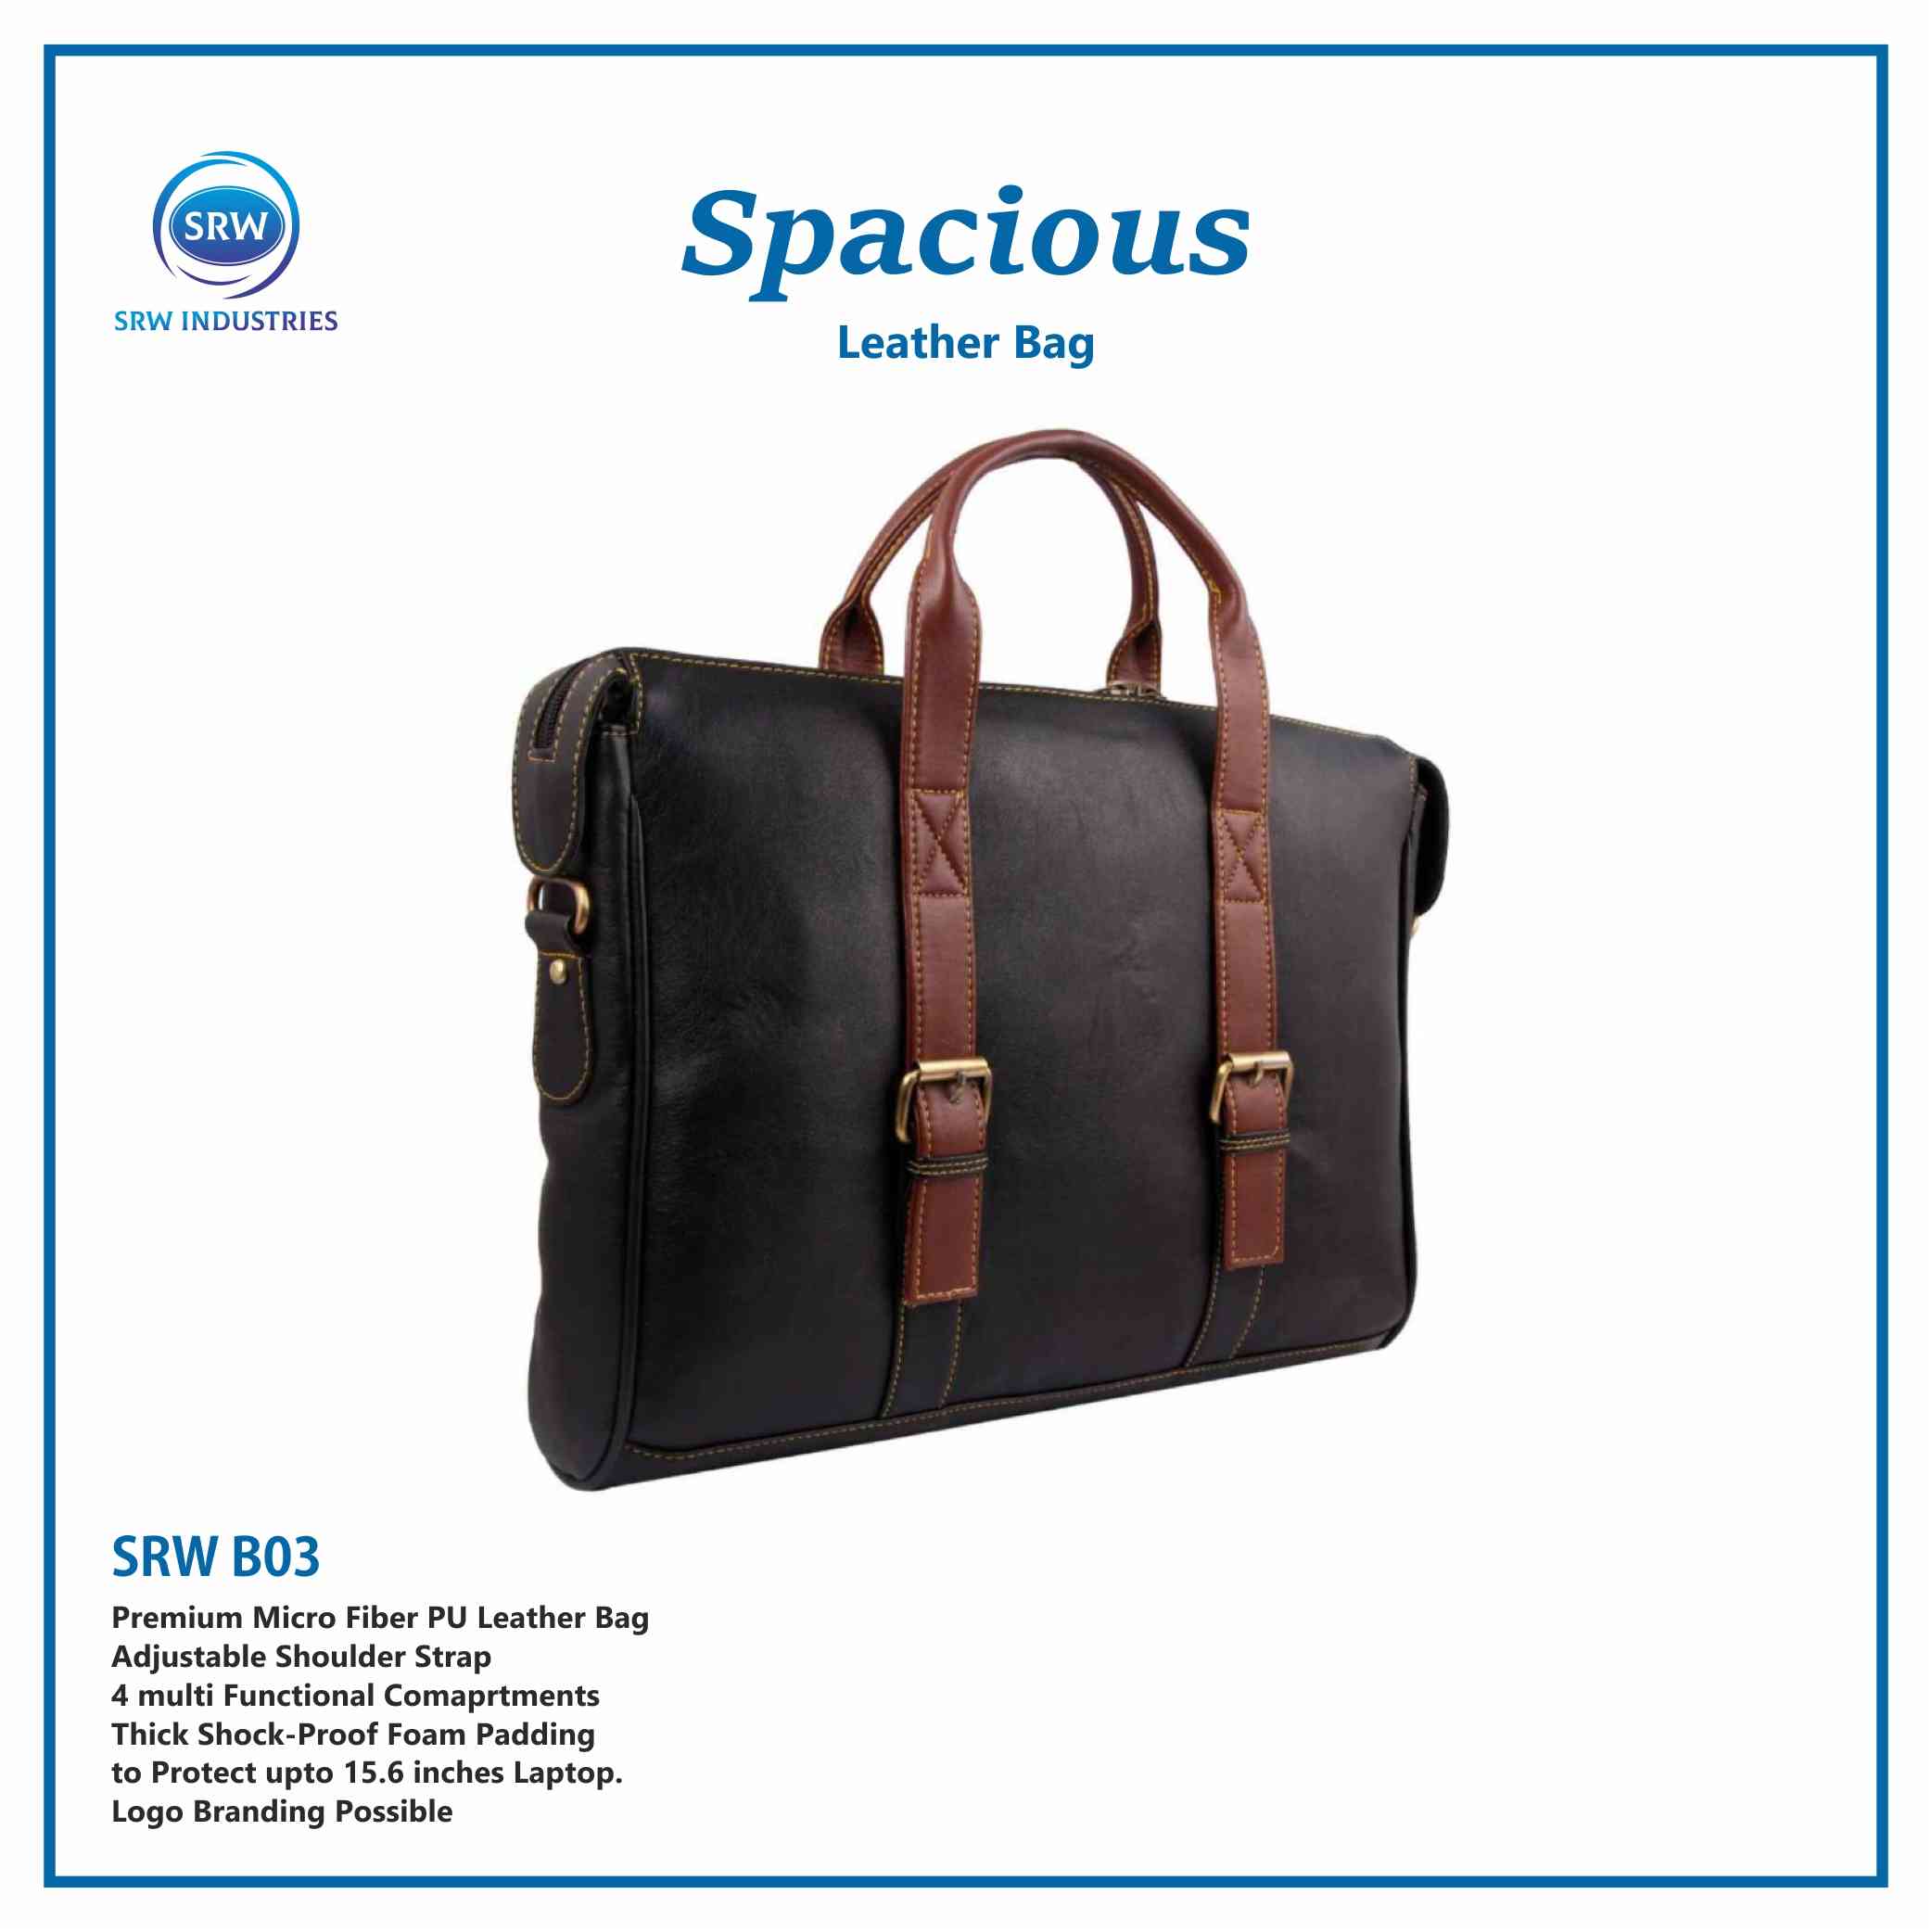 Corporate Gifting Products Manufacturers in Pune